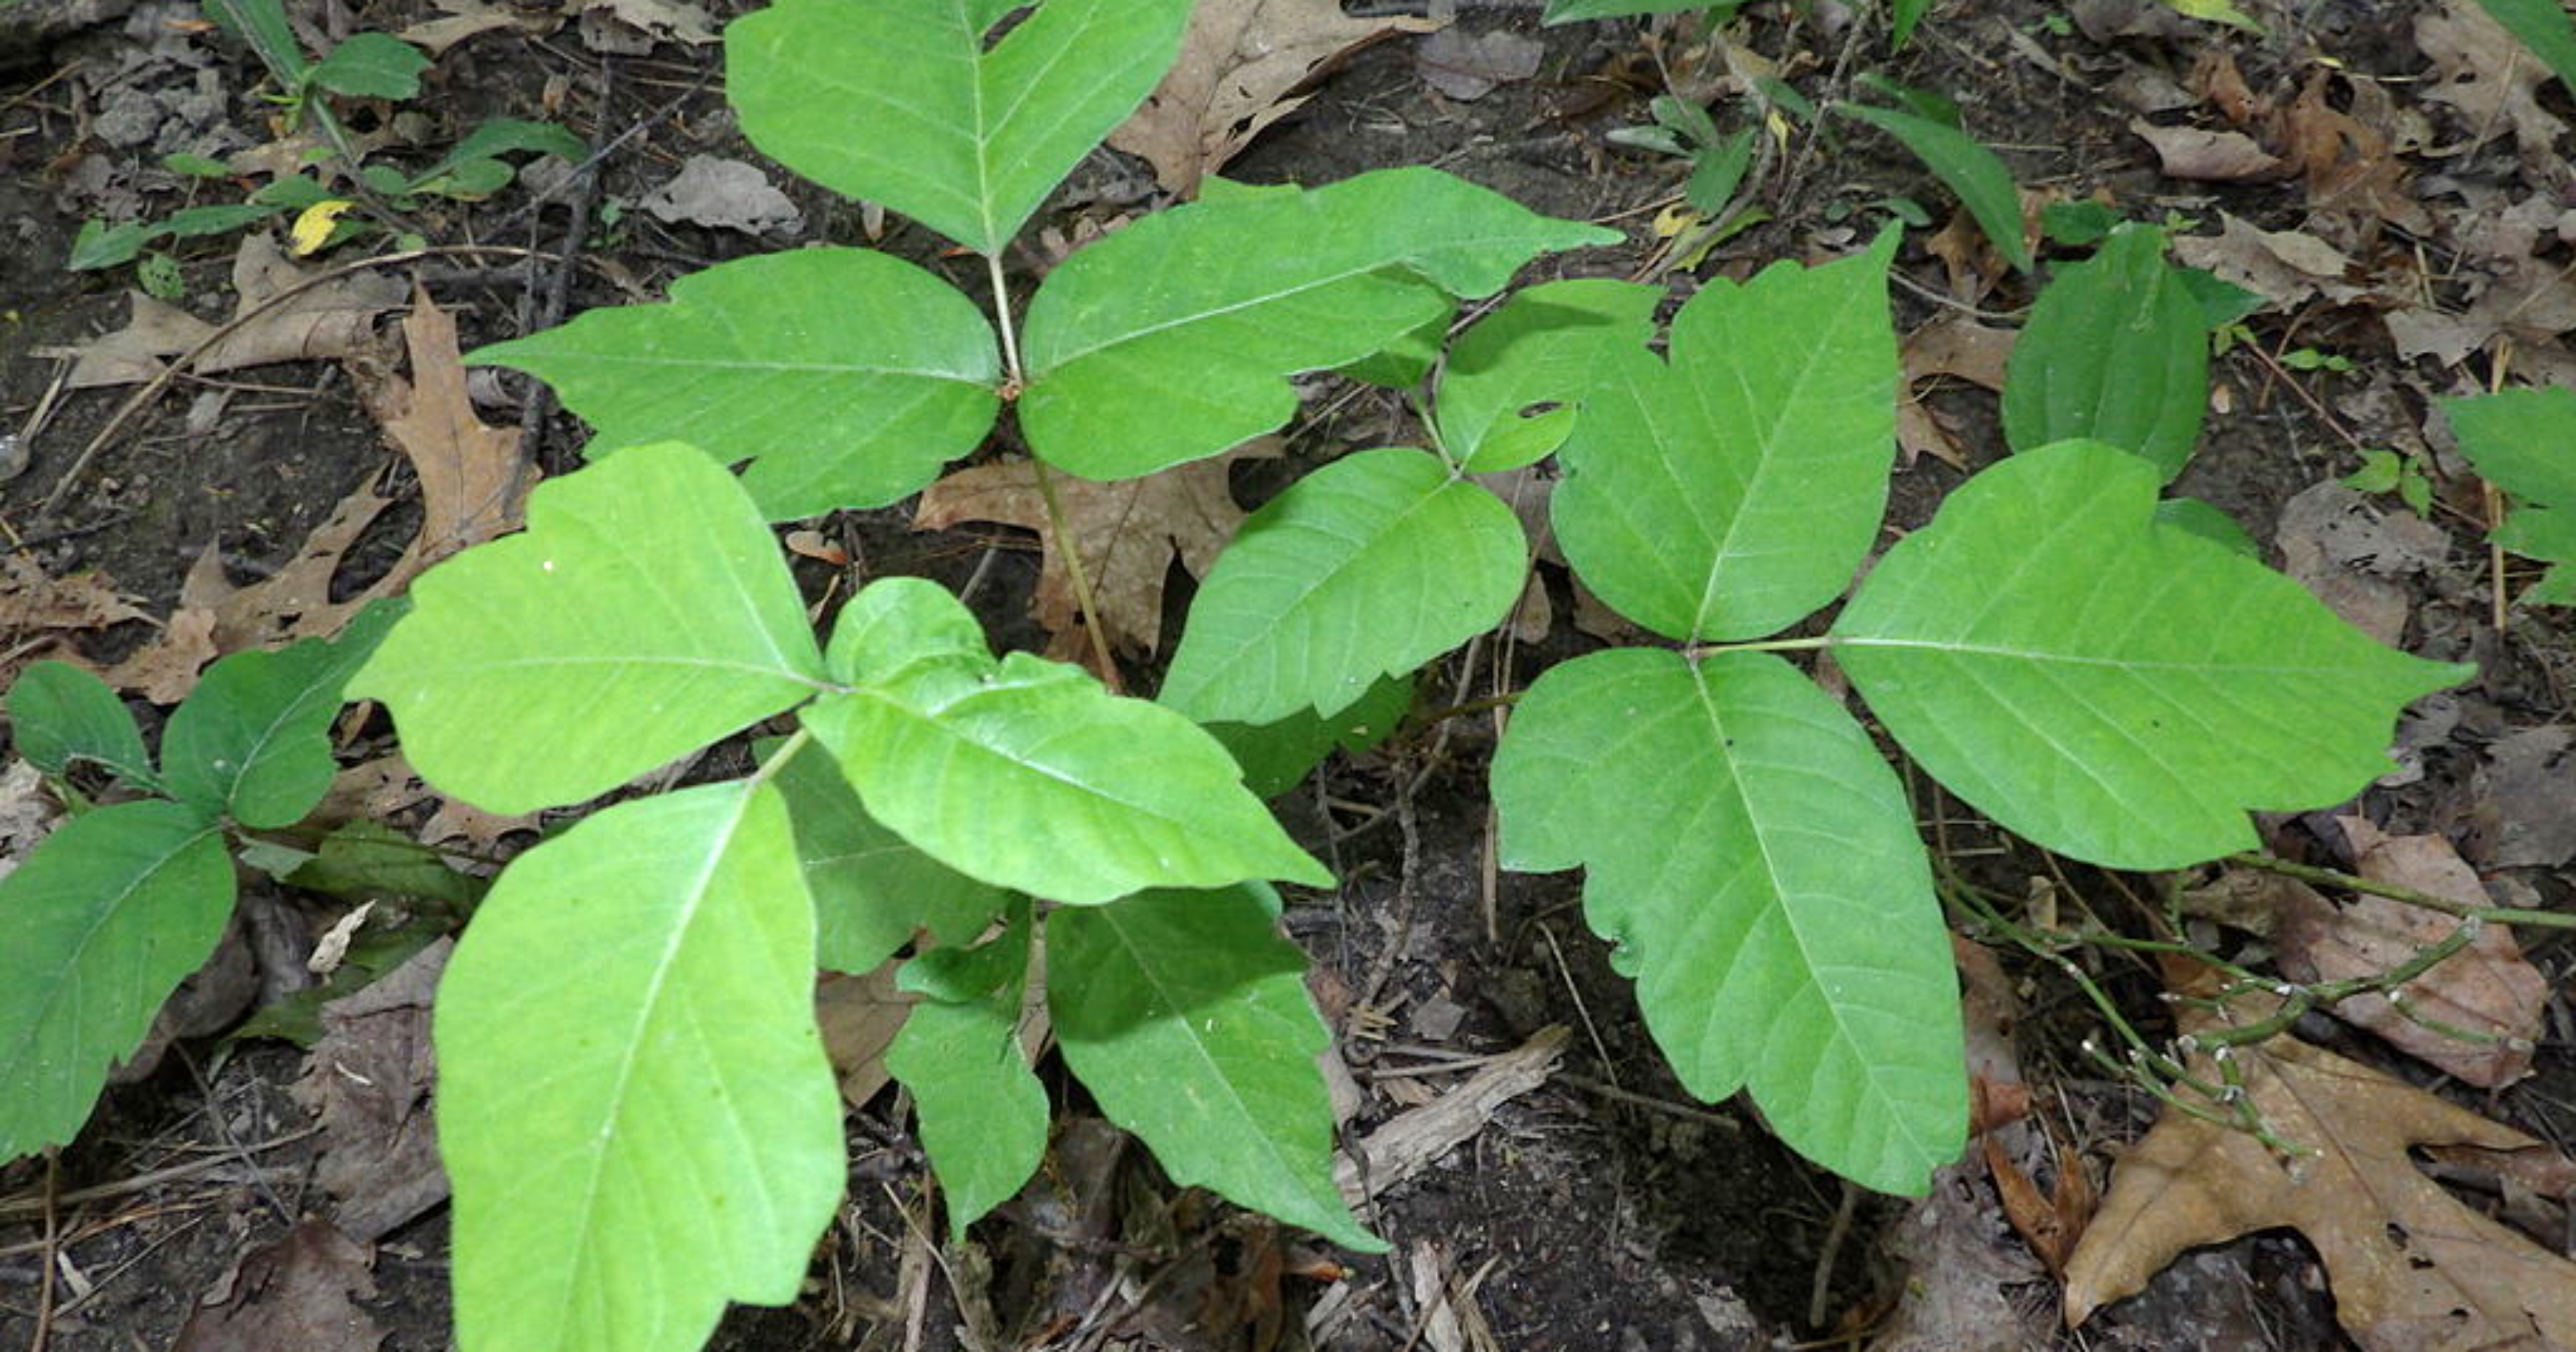 Poison ivy: How to recognize it, how to get rid of it